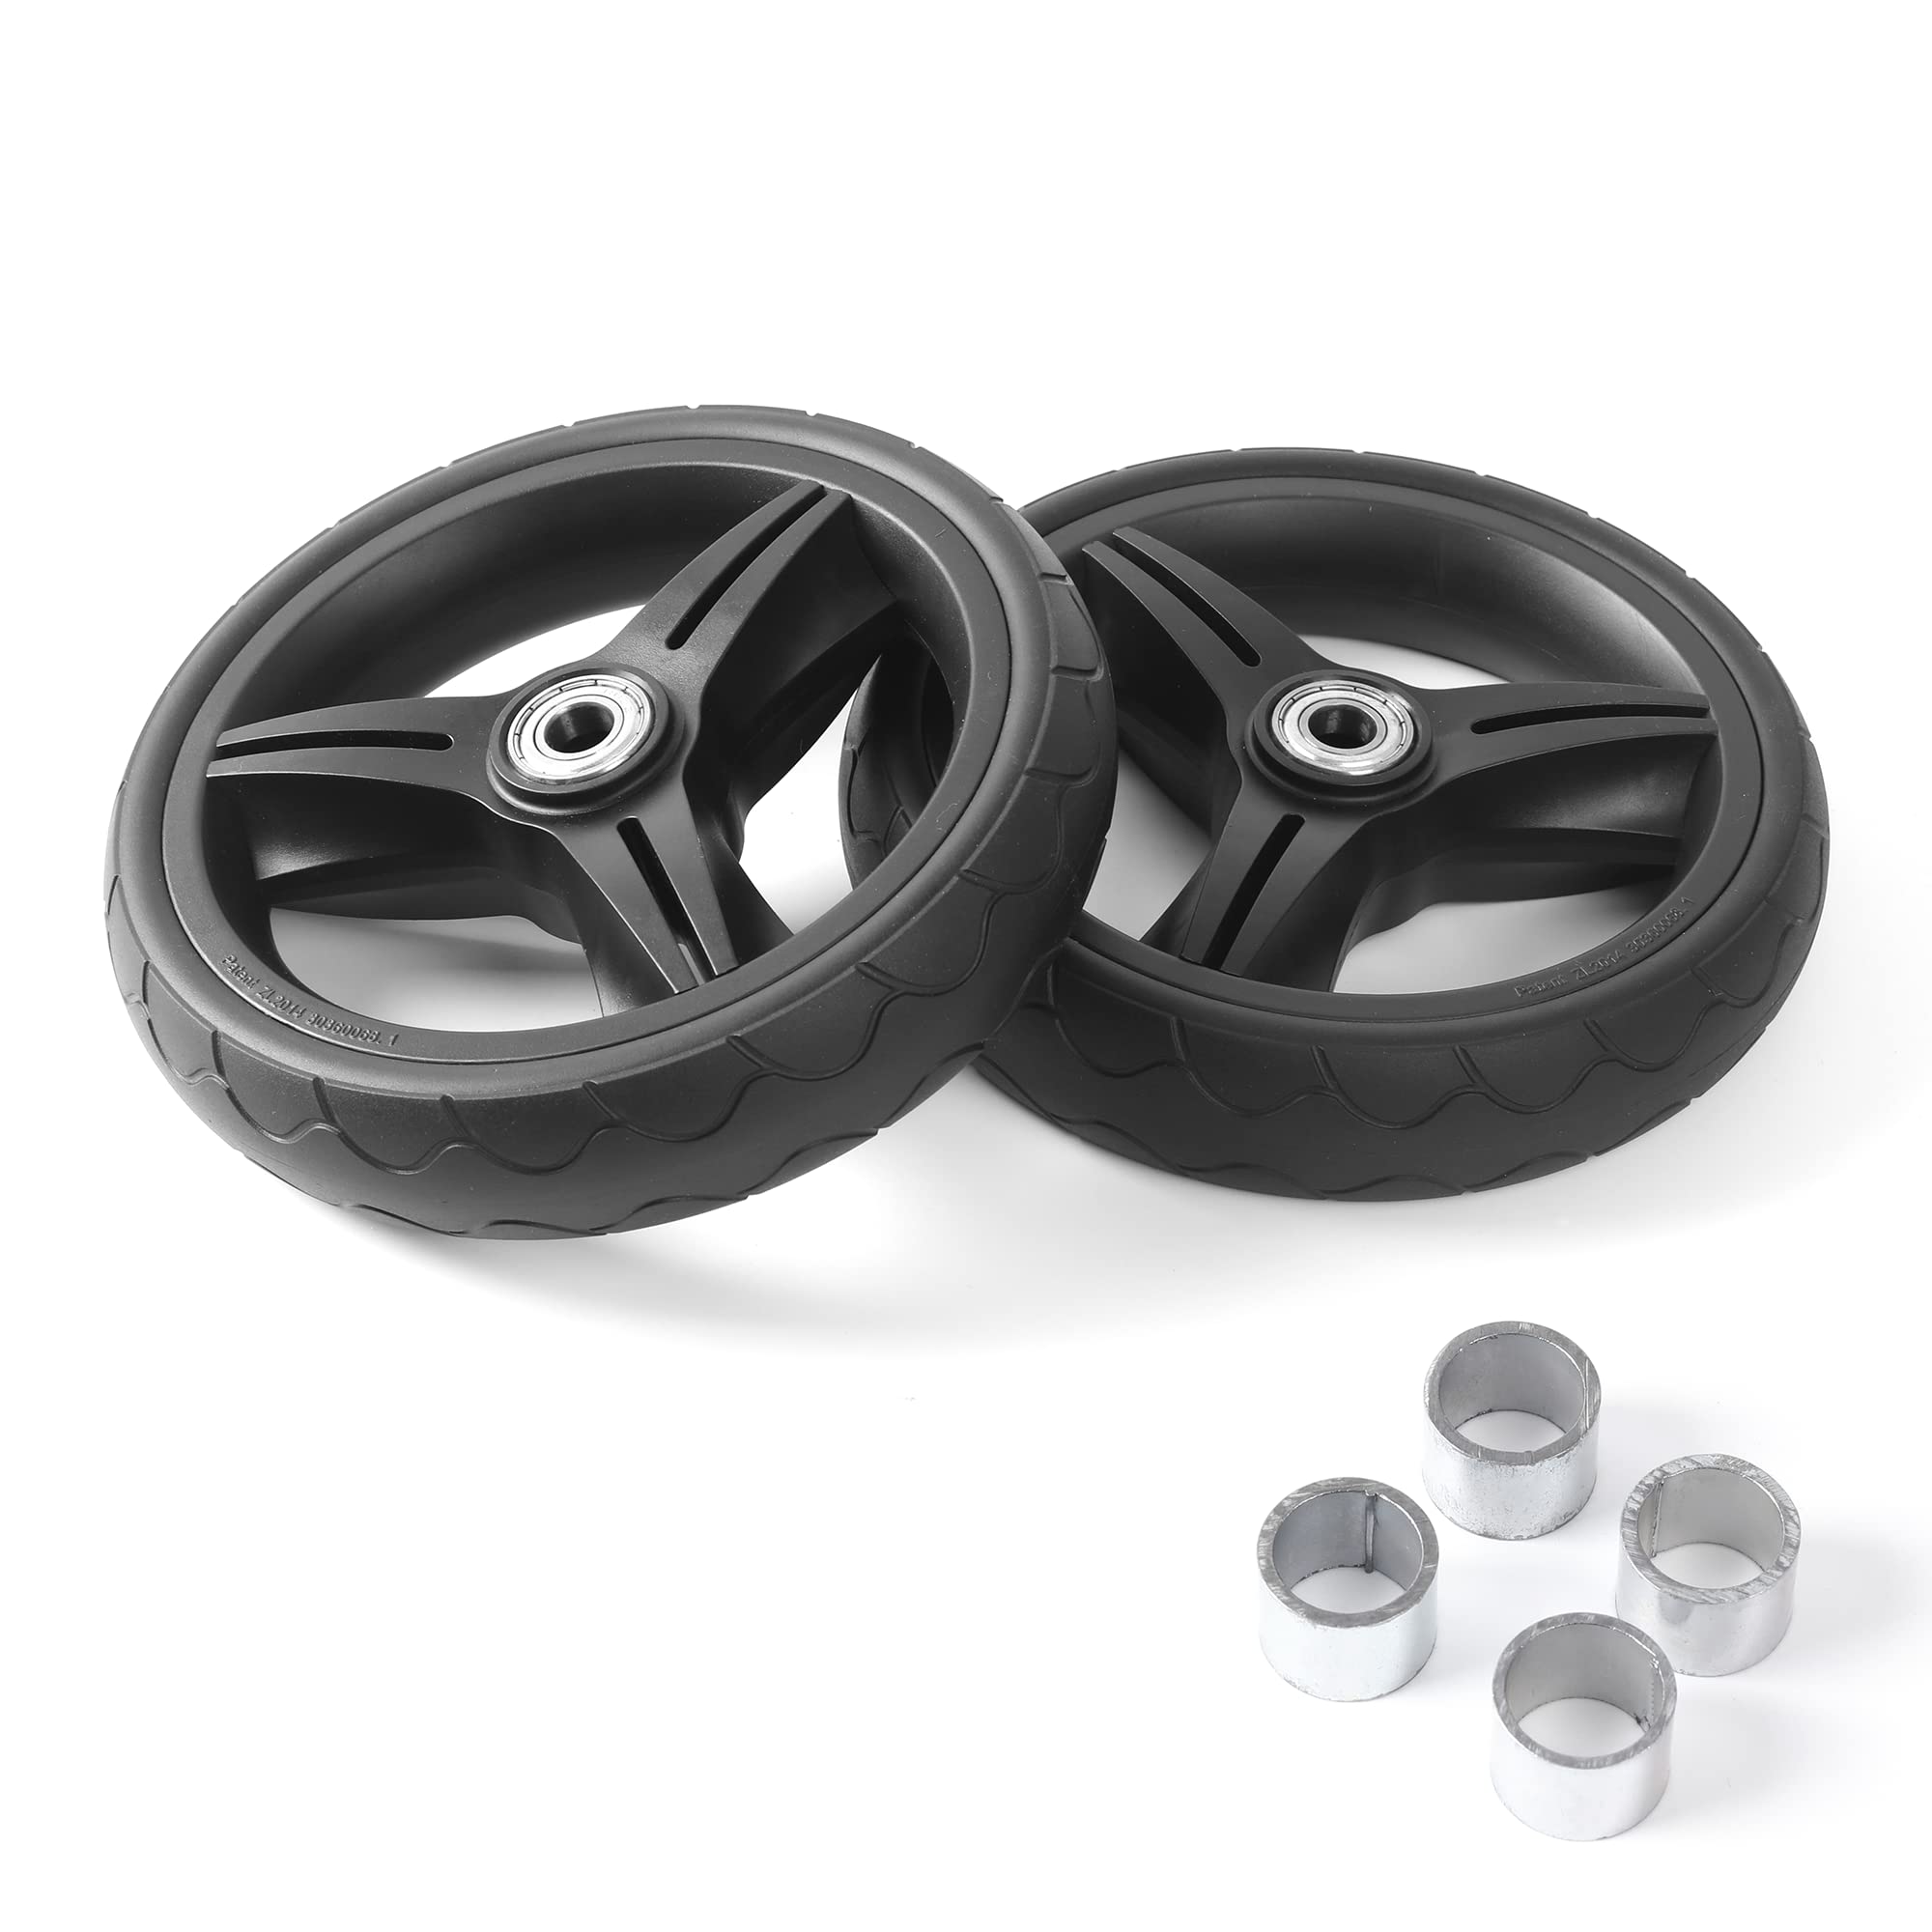 CalPalmy Front Wheels and Tires for Baby Strollers - 1.6” Hub Length and 0.488” Borehole - Fits Baby Jogger City Select and City Premier Stroller Models